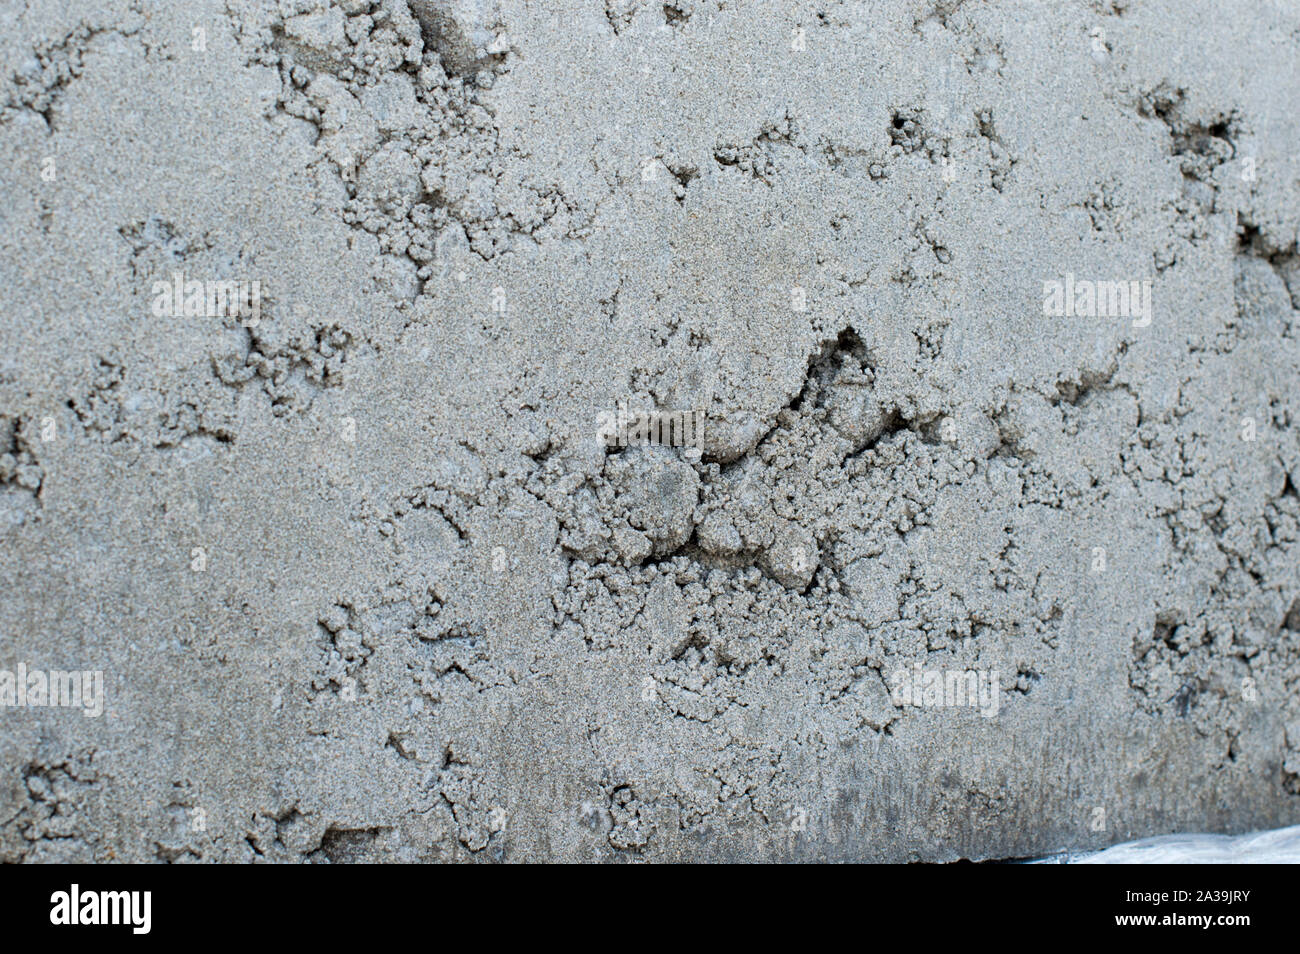 Concrete block for wall construction. Pronounced texture. Close-up. Russia. Stock Photo